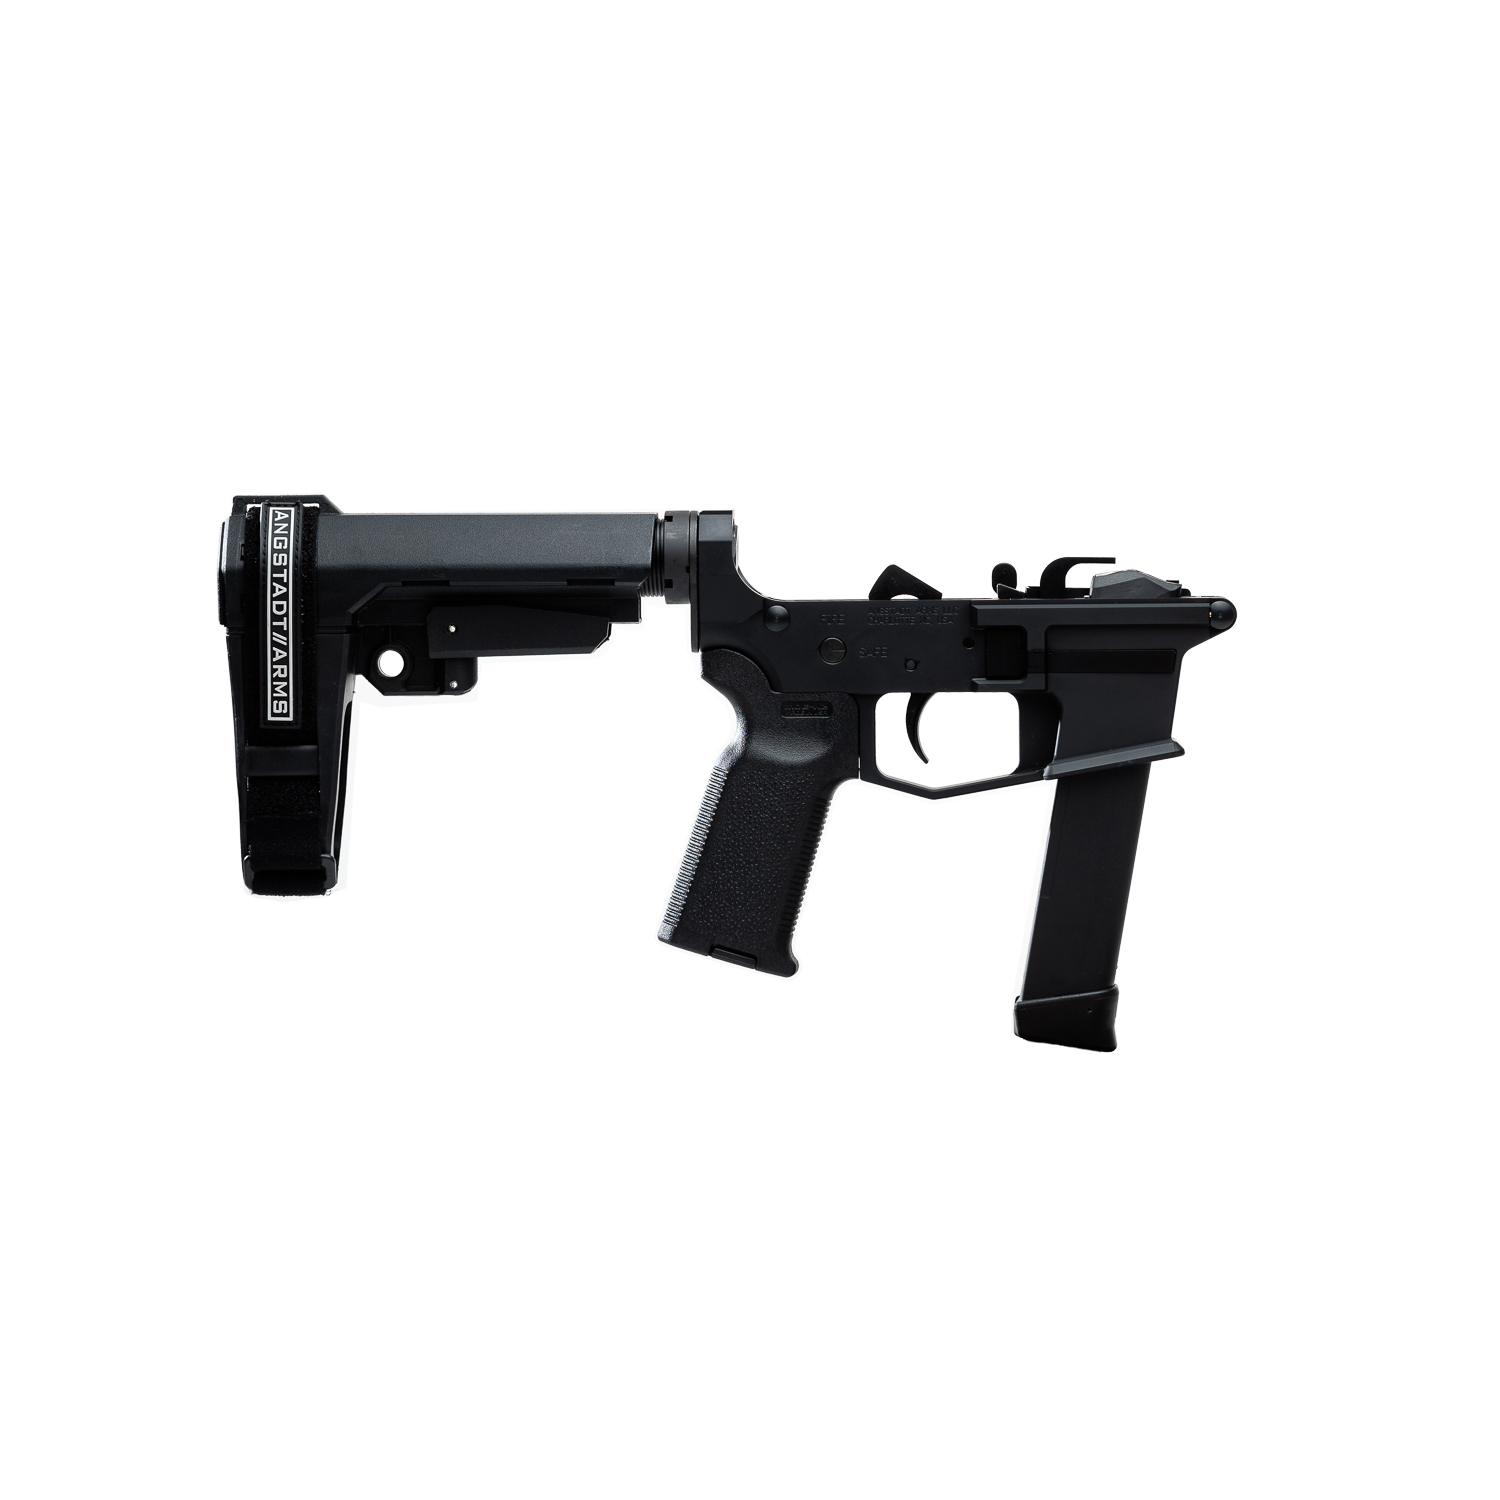 It includes a SB Tactical SBA3 stabilizing brace and has last round bolt ho...